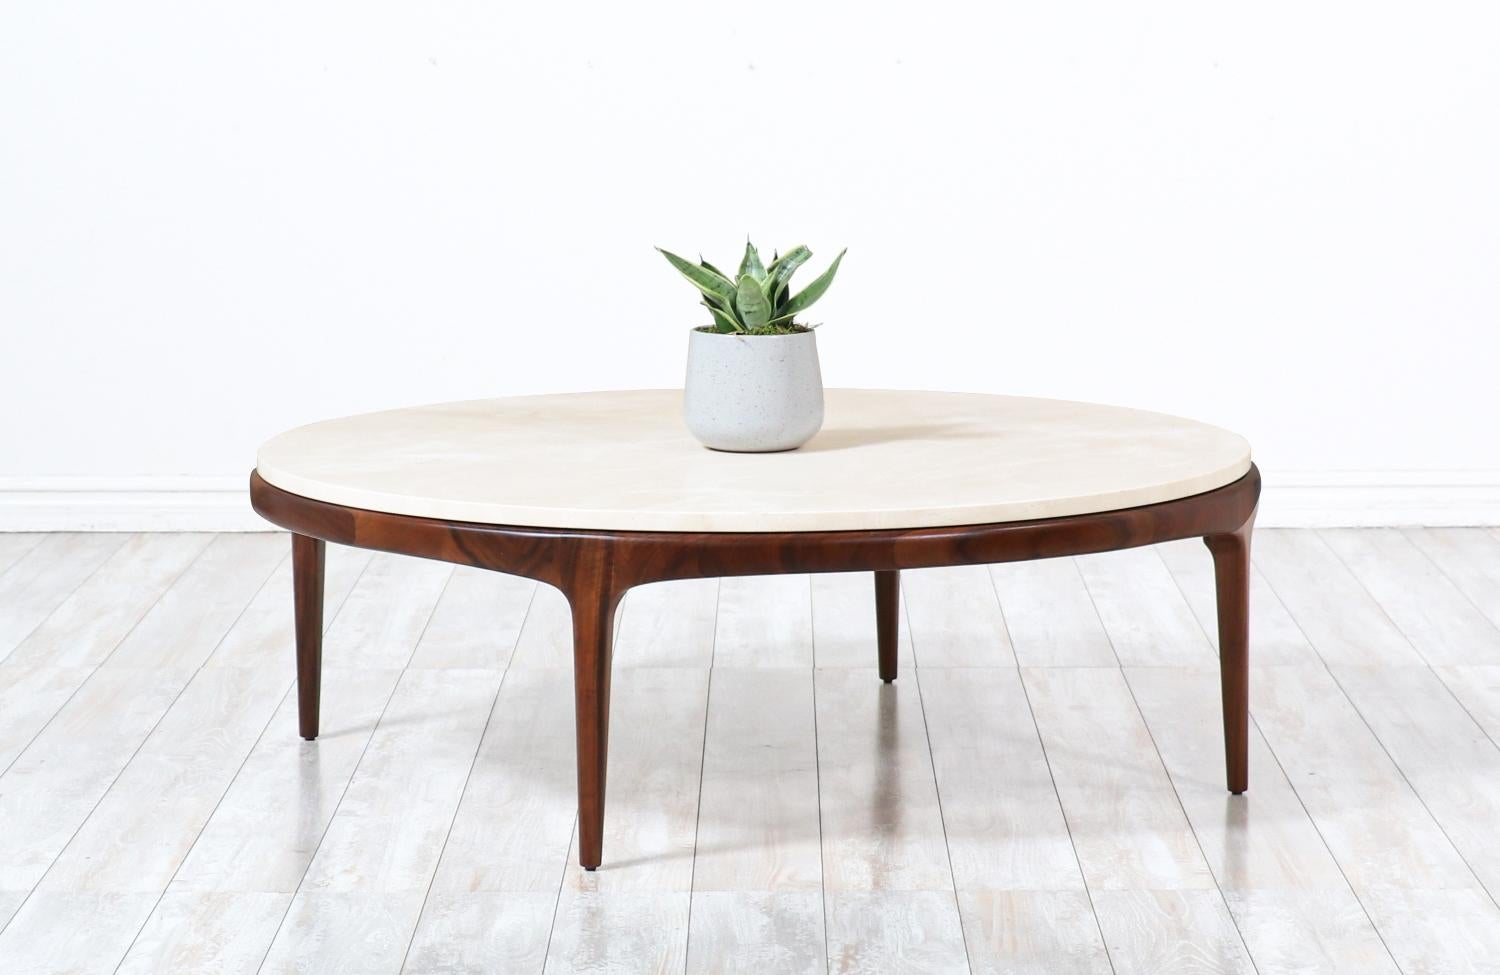 American Mid-Century Modern “Rythm” Coffee Table with Crema Marfil Stone Top by Lane